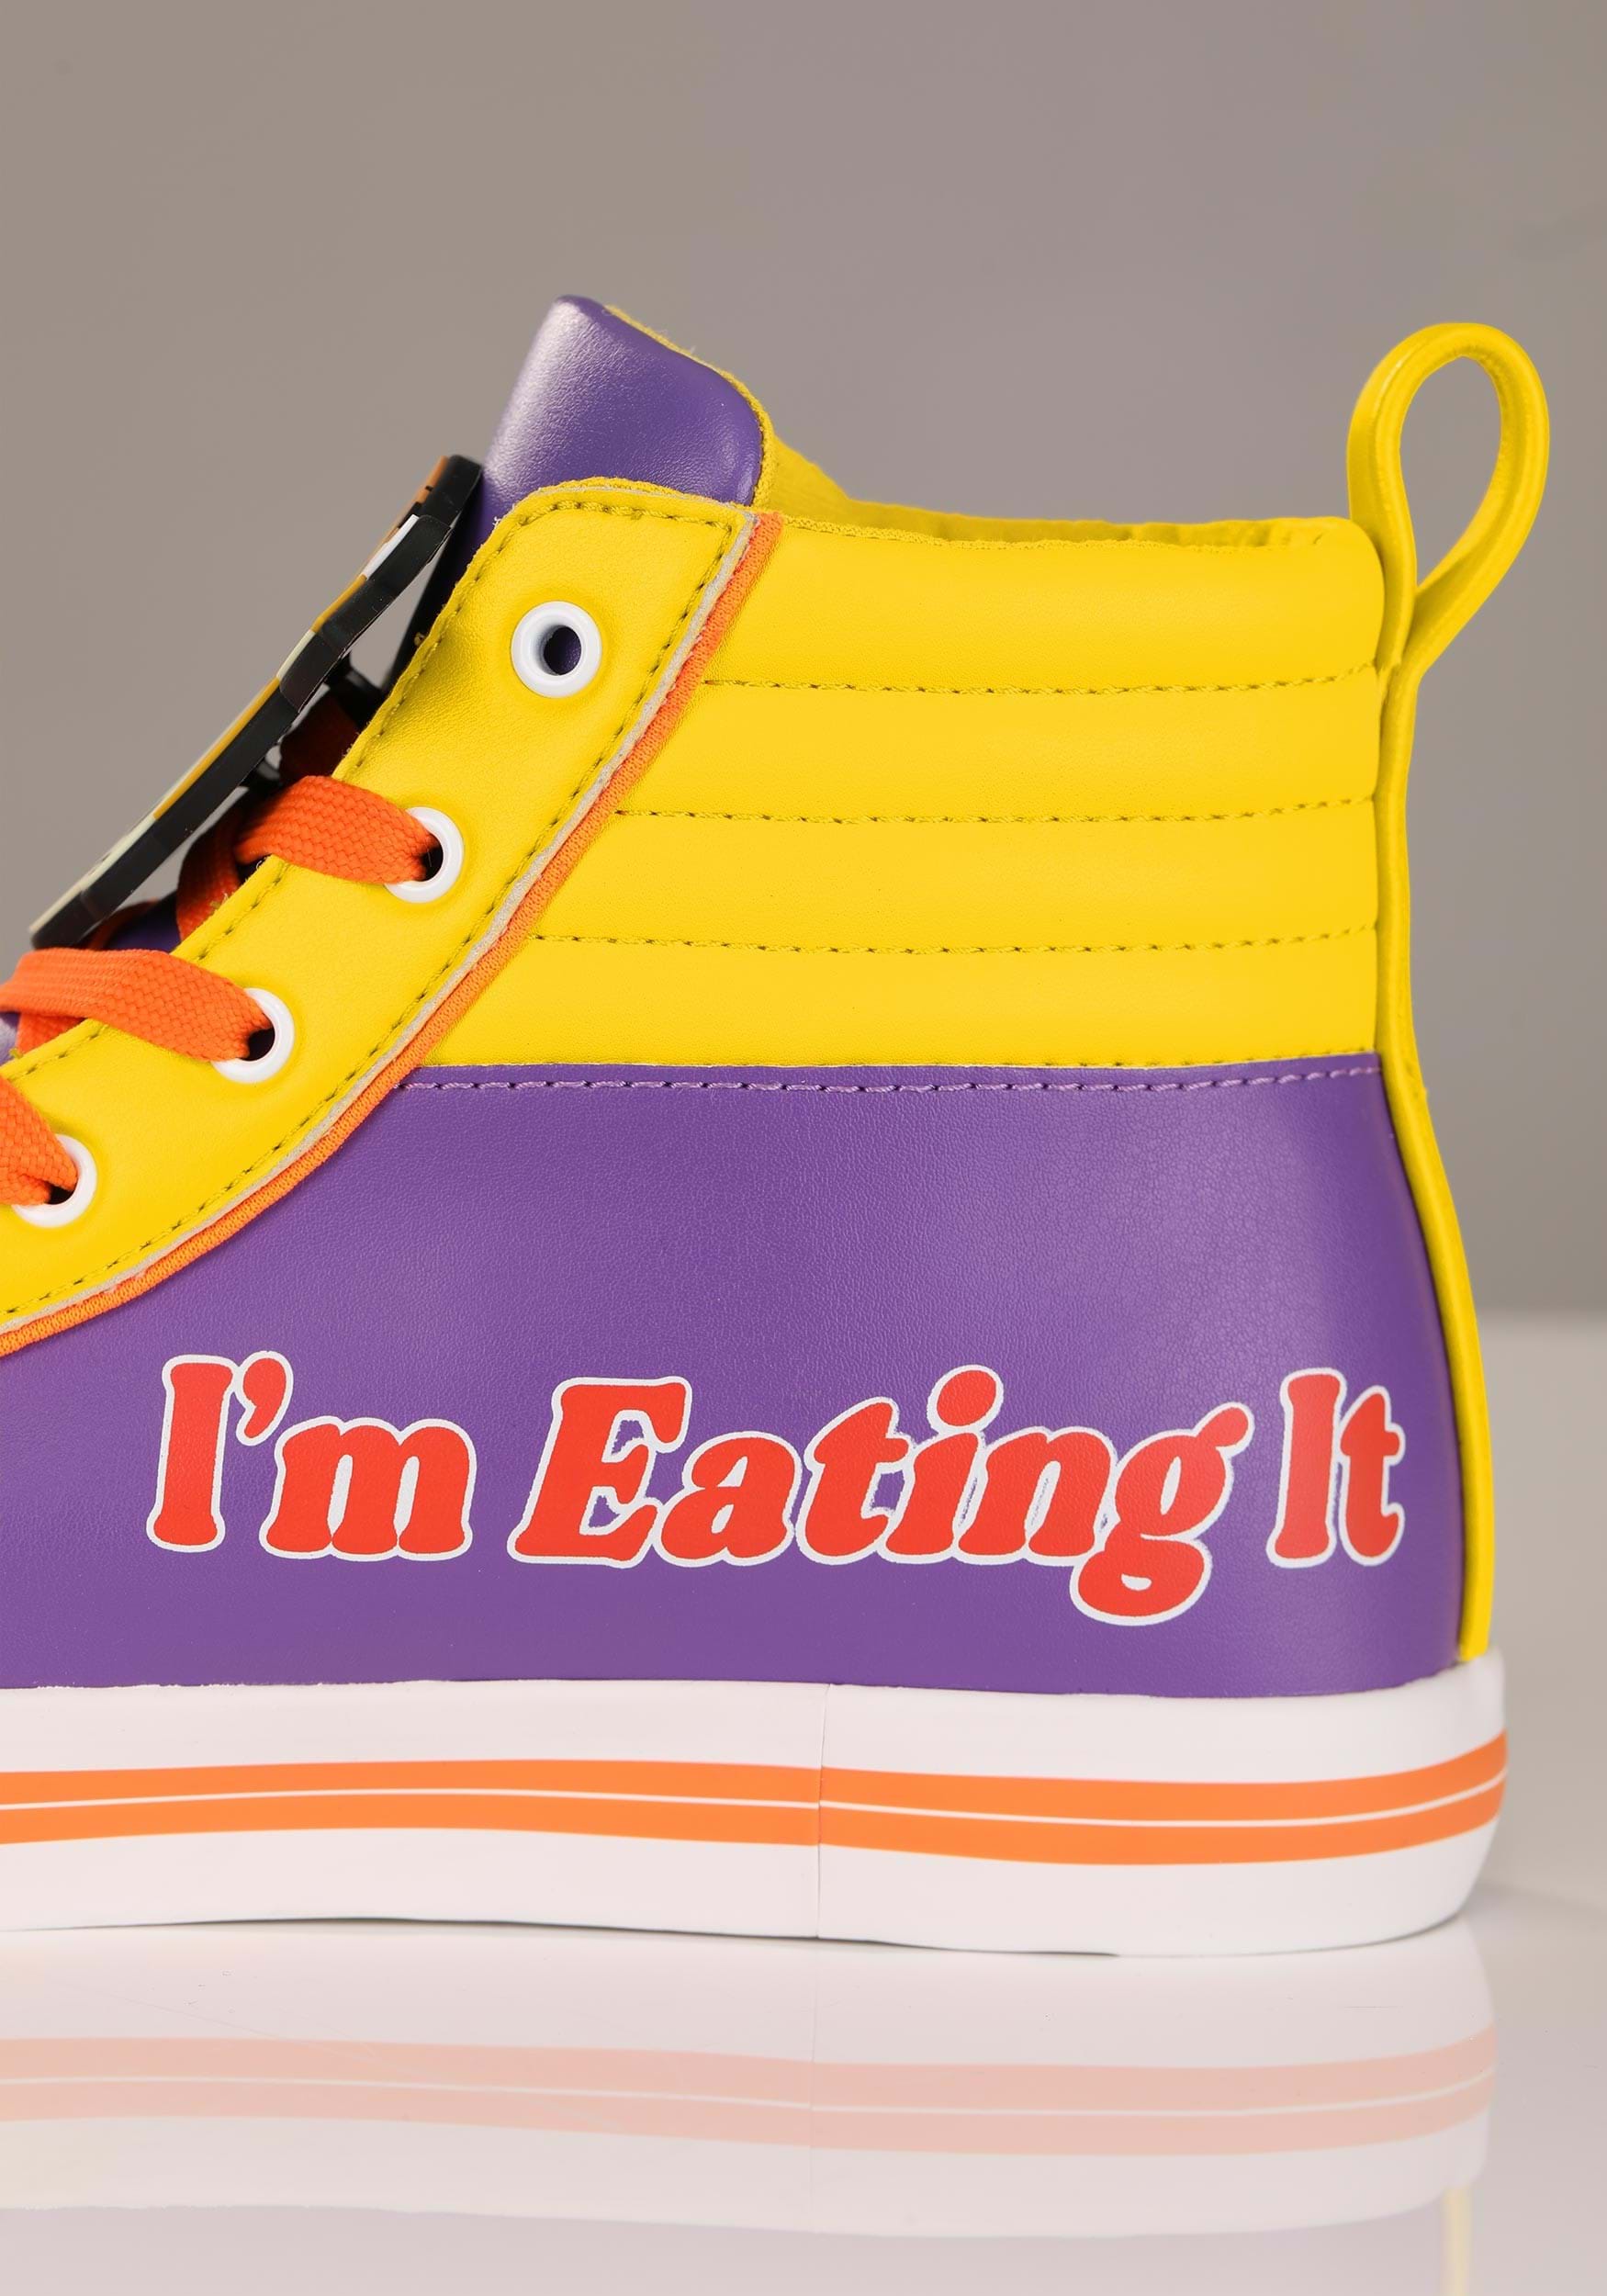 imagine spot residue Mooby's Jay and Silent Bob Shoes